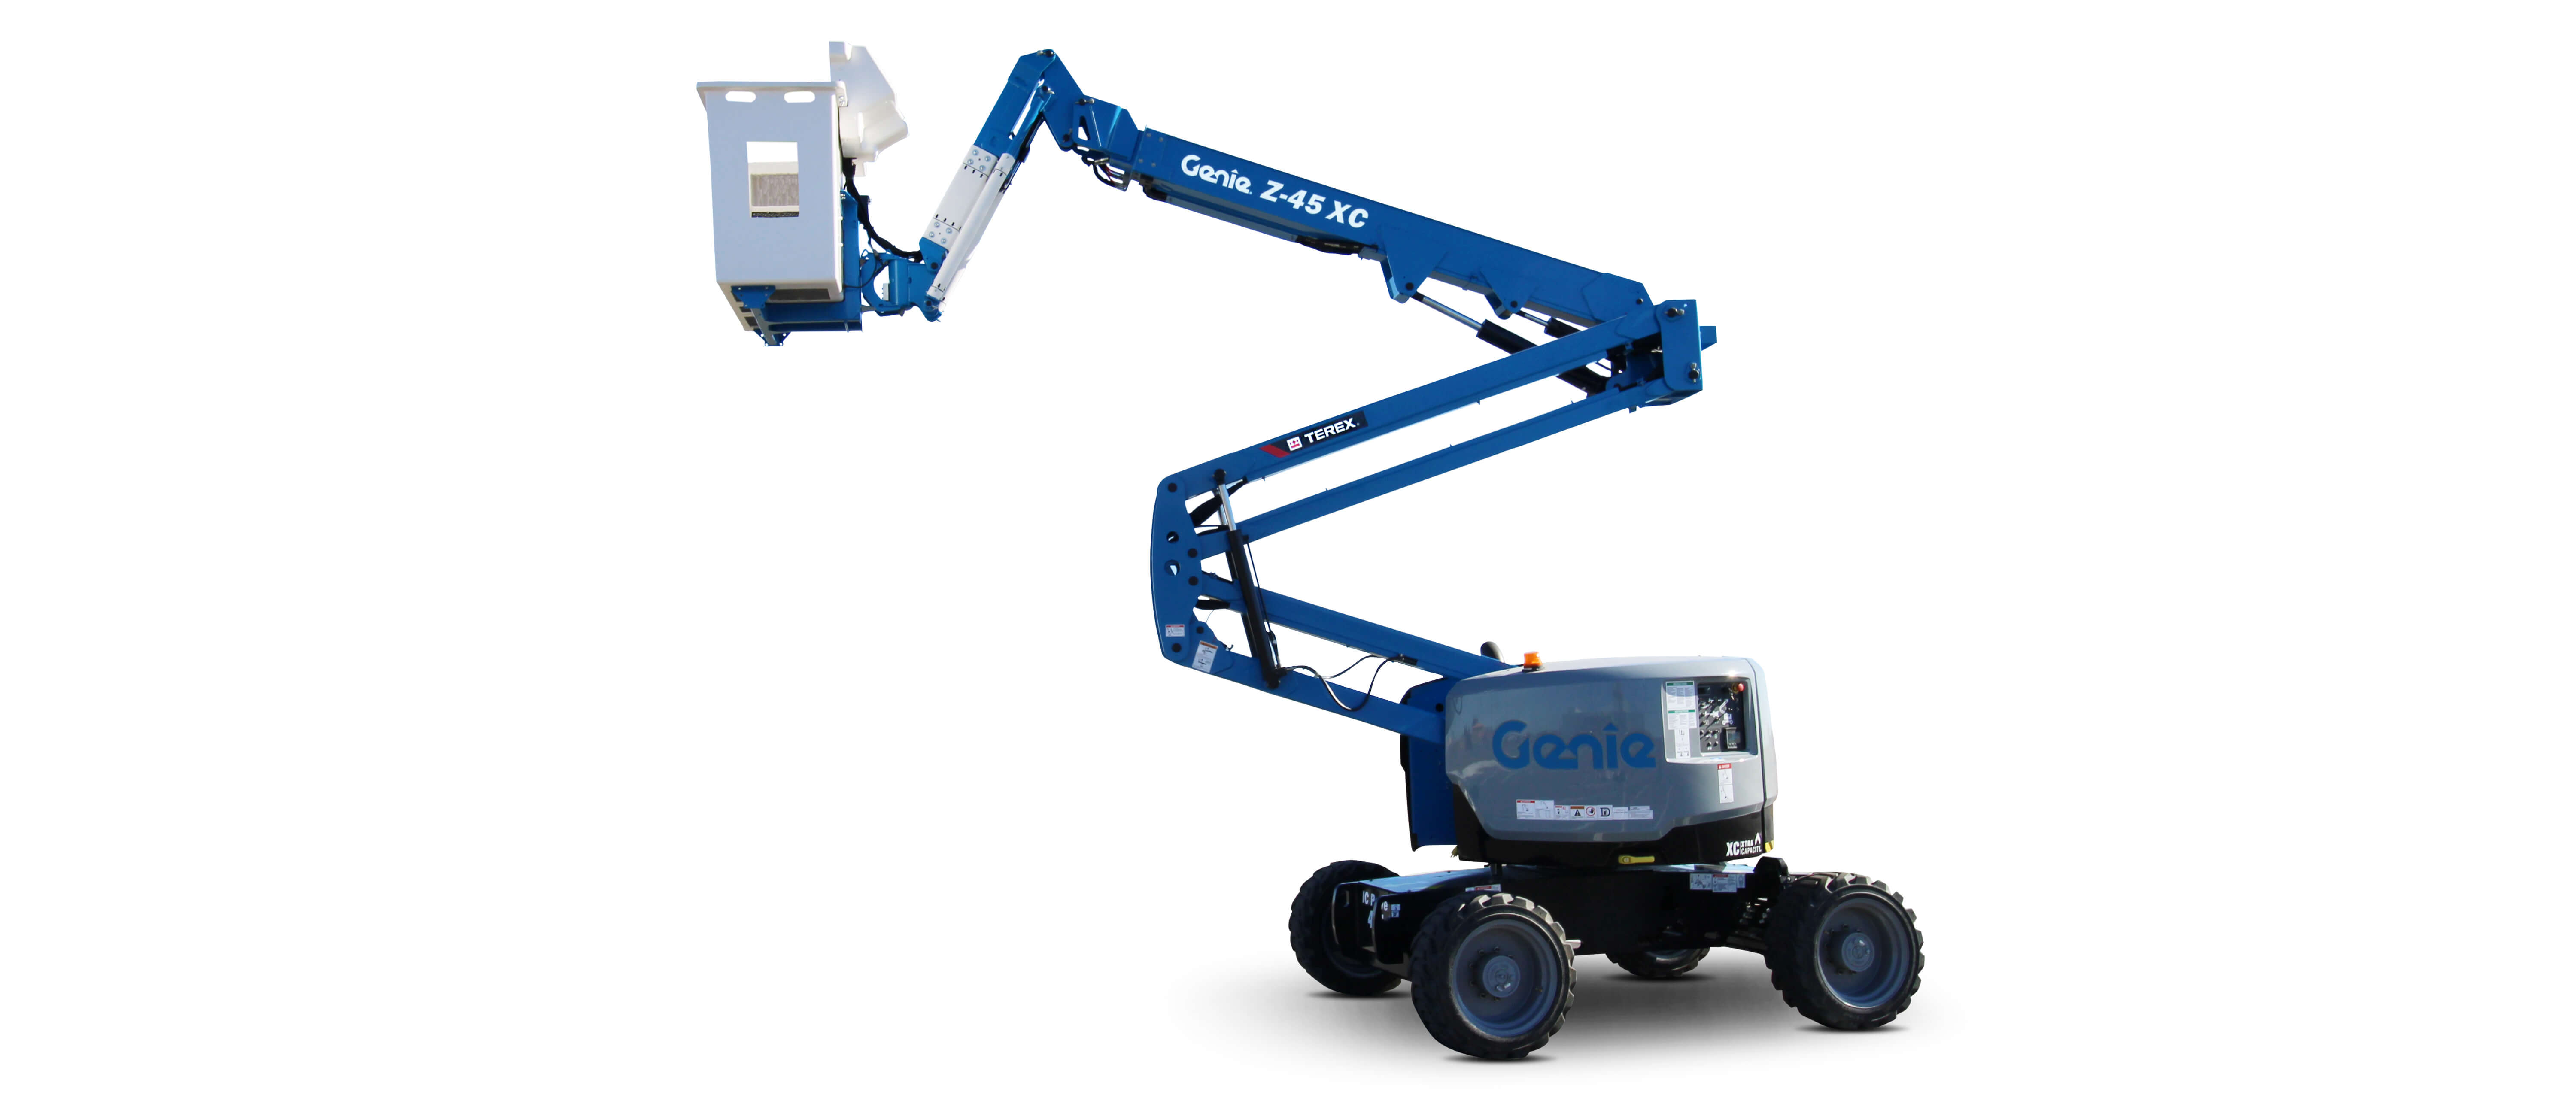 Terex Z-45 Substation Aerial Devices | Substation Lift